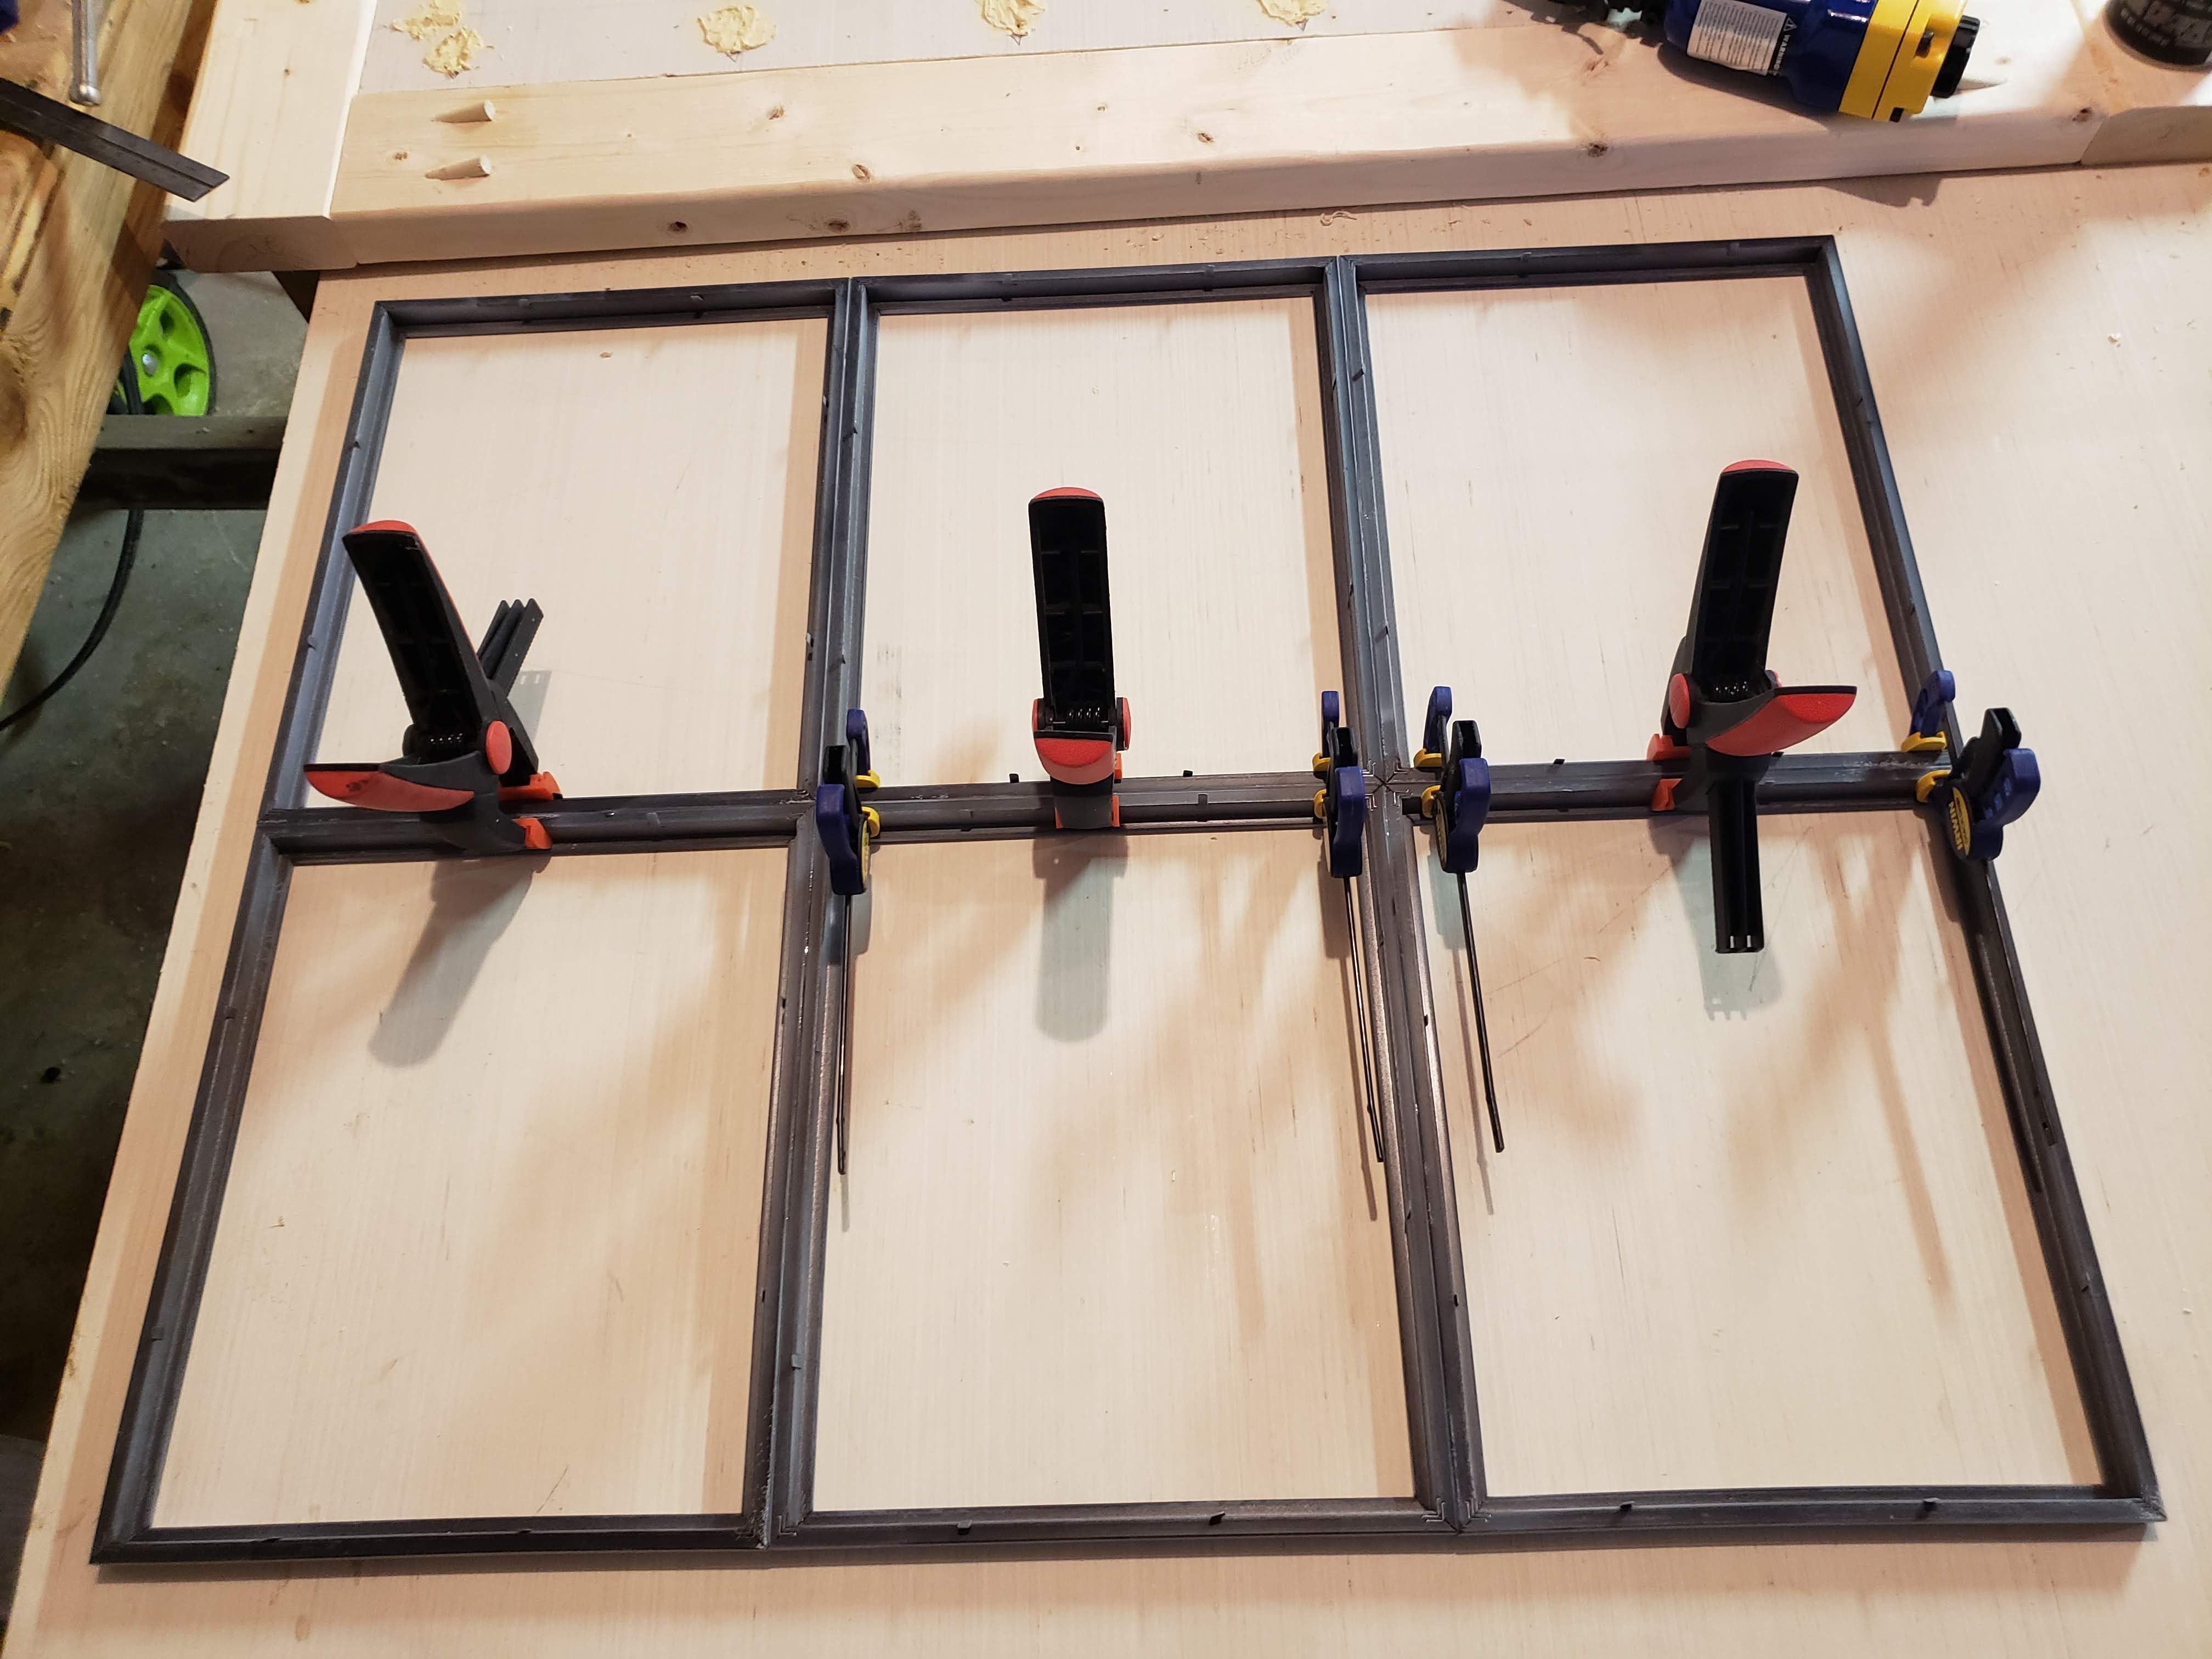 Glue and clamp the frames together to create the farmhouse window